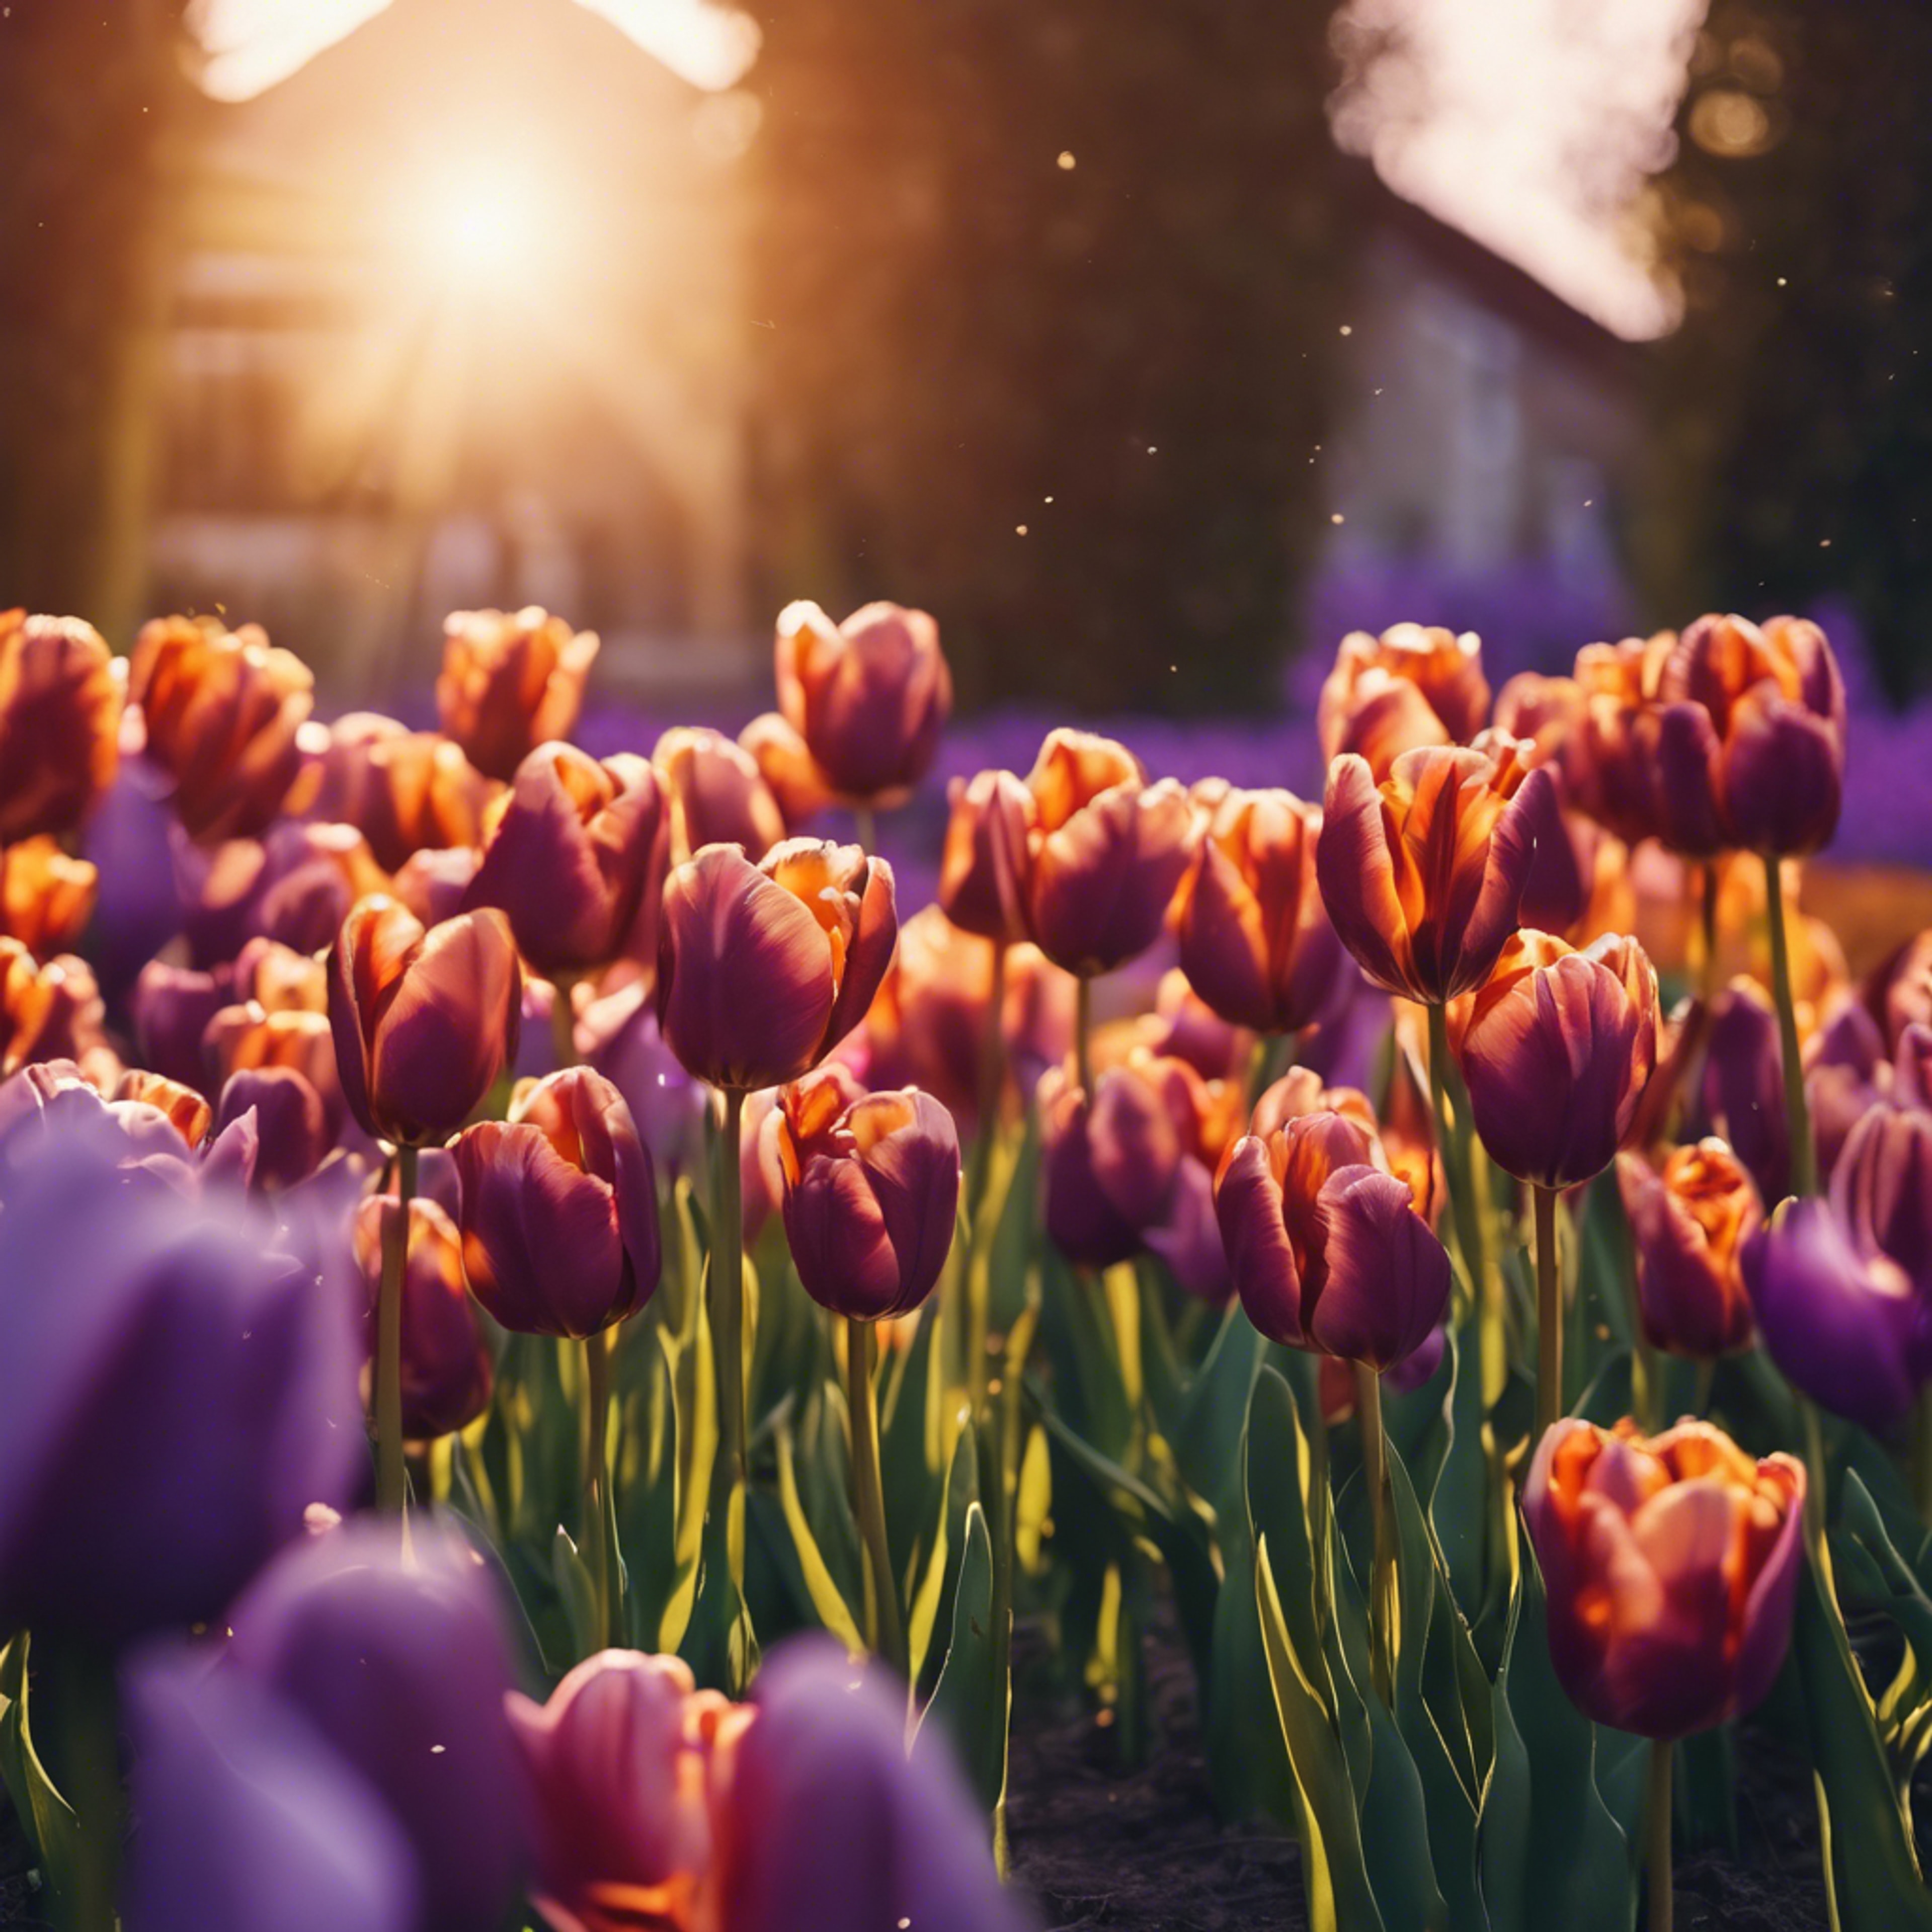 Tulips in a garden, bathed in the purple and orange rays of the setting sun. Tapeta[929499f715404d6e96f8]